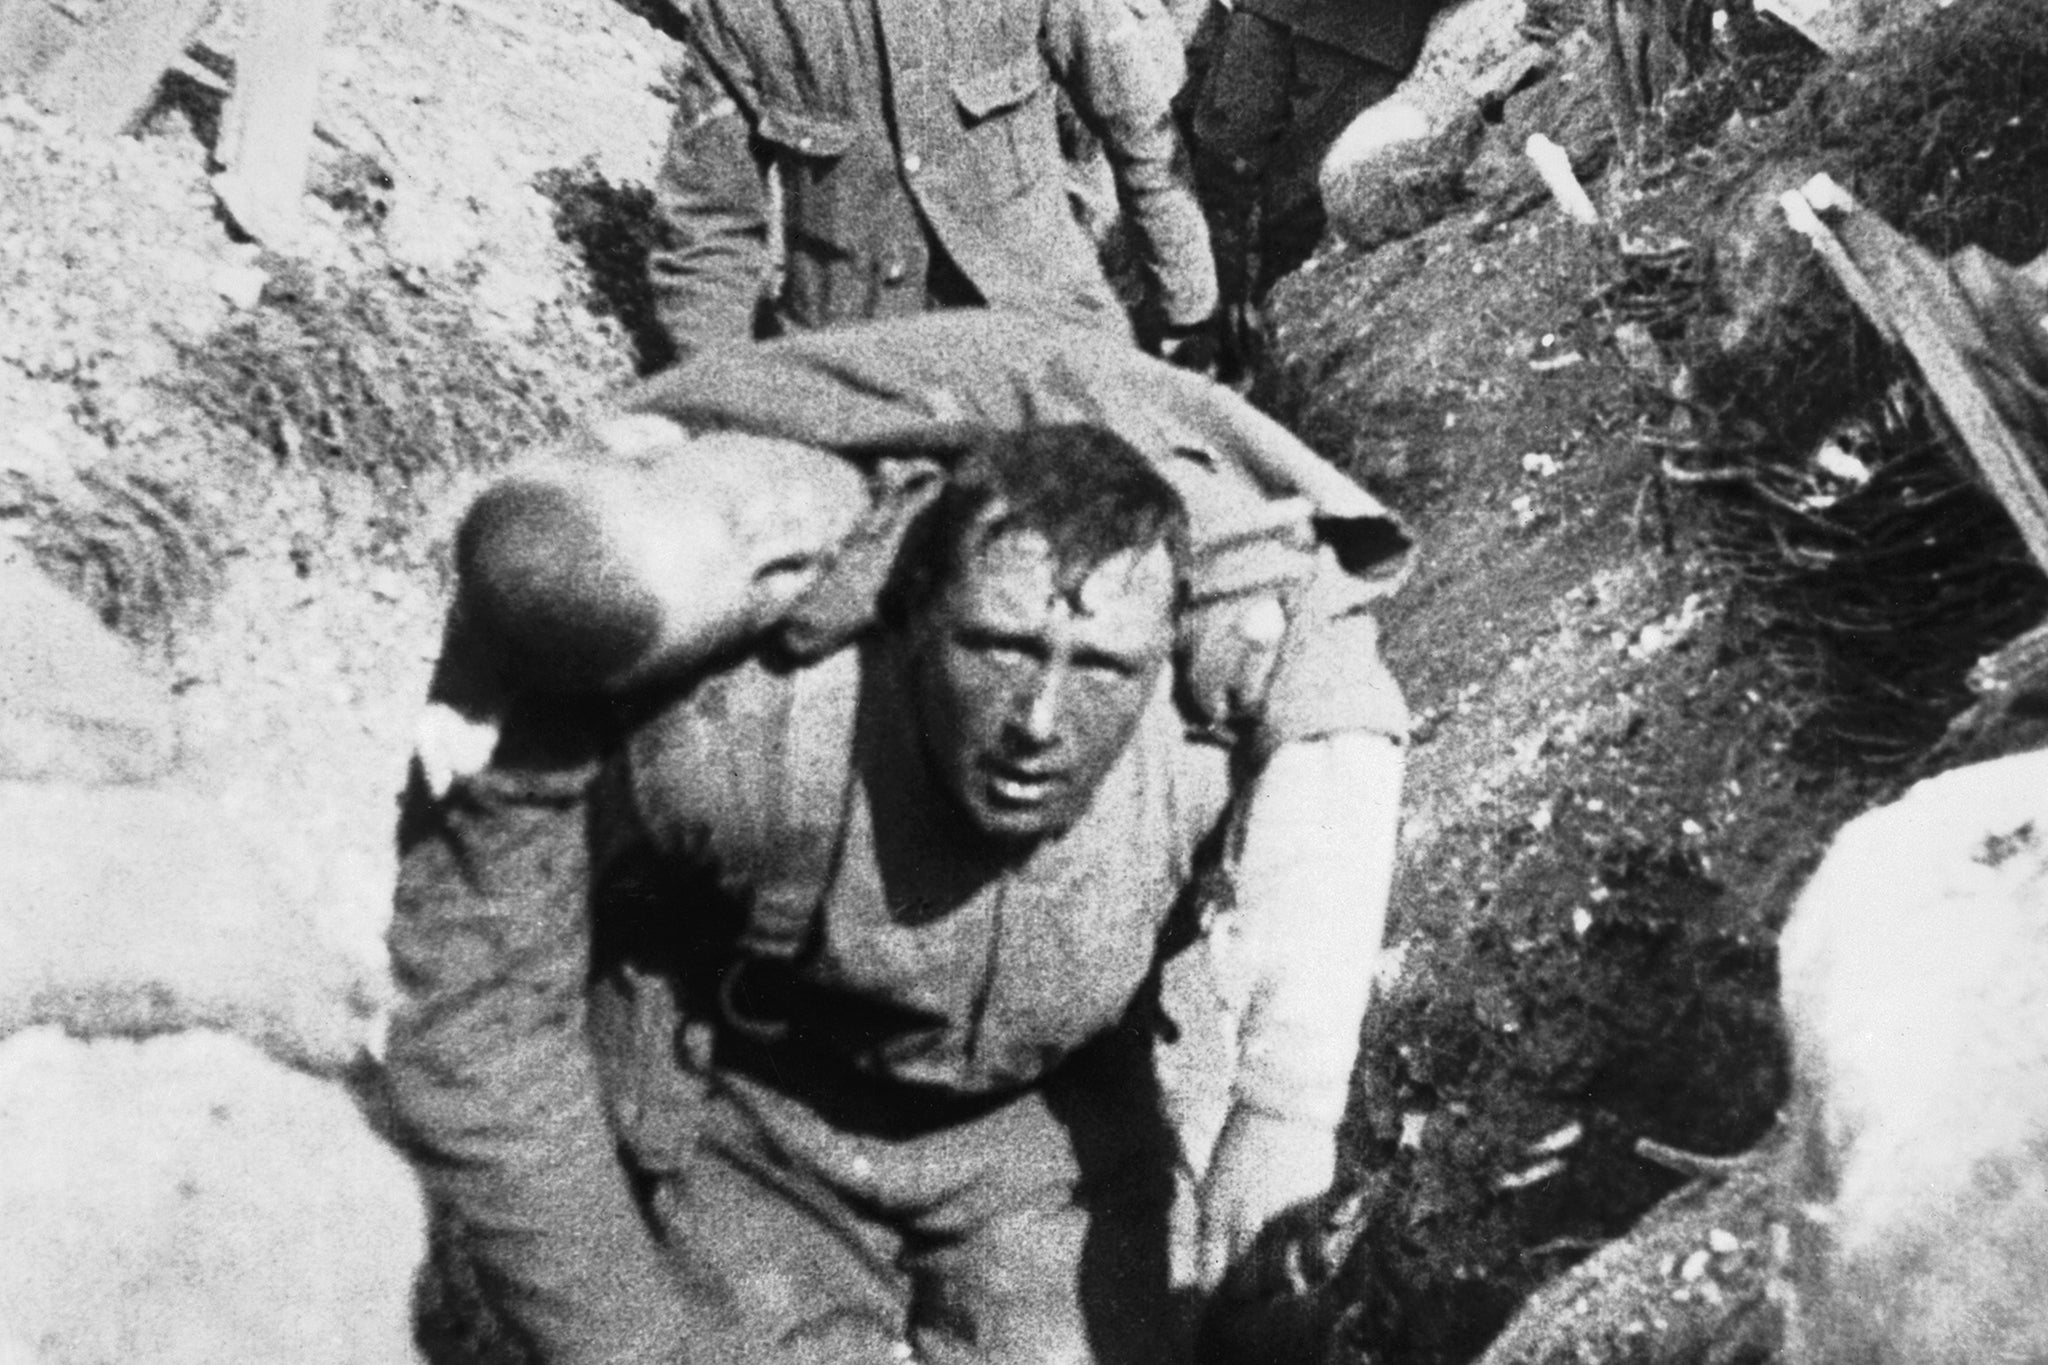 A still from the 1916 British documentary film ‘The Battle of the Somme’